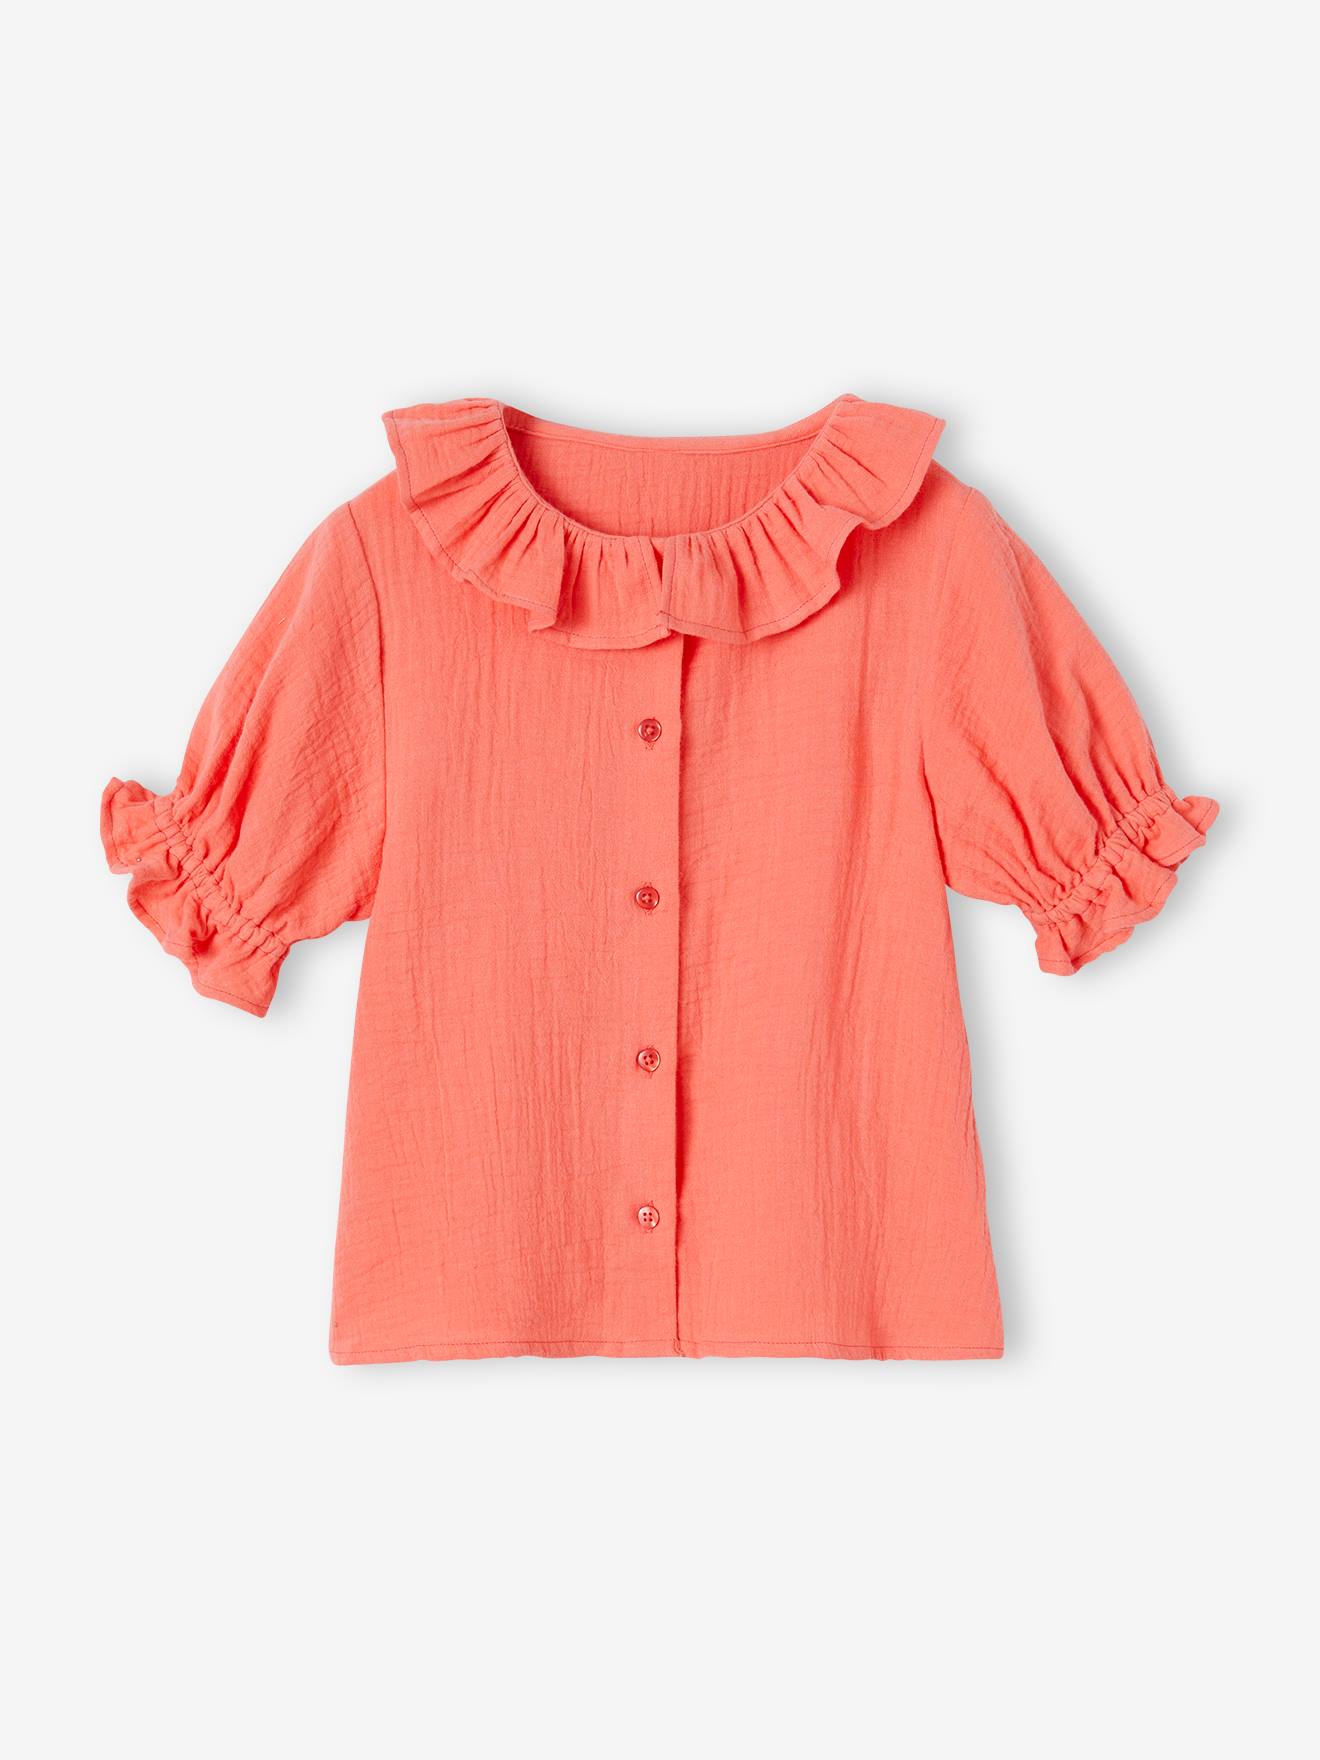 Blouse in Cotton Gauze with Frilled Collar, for Girls coral